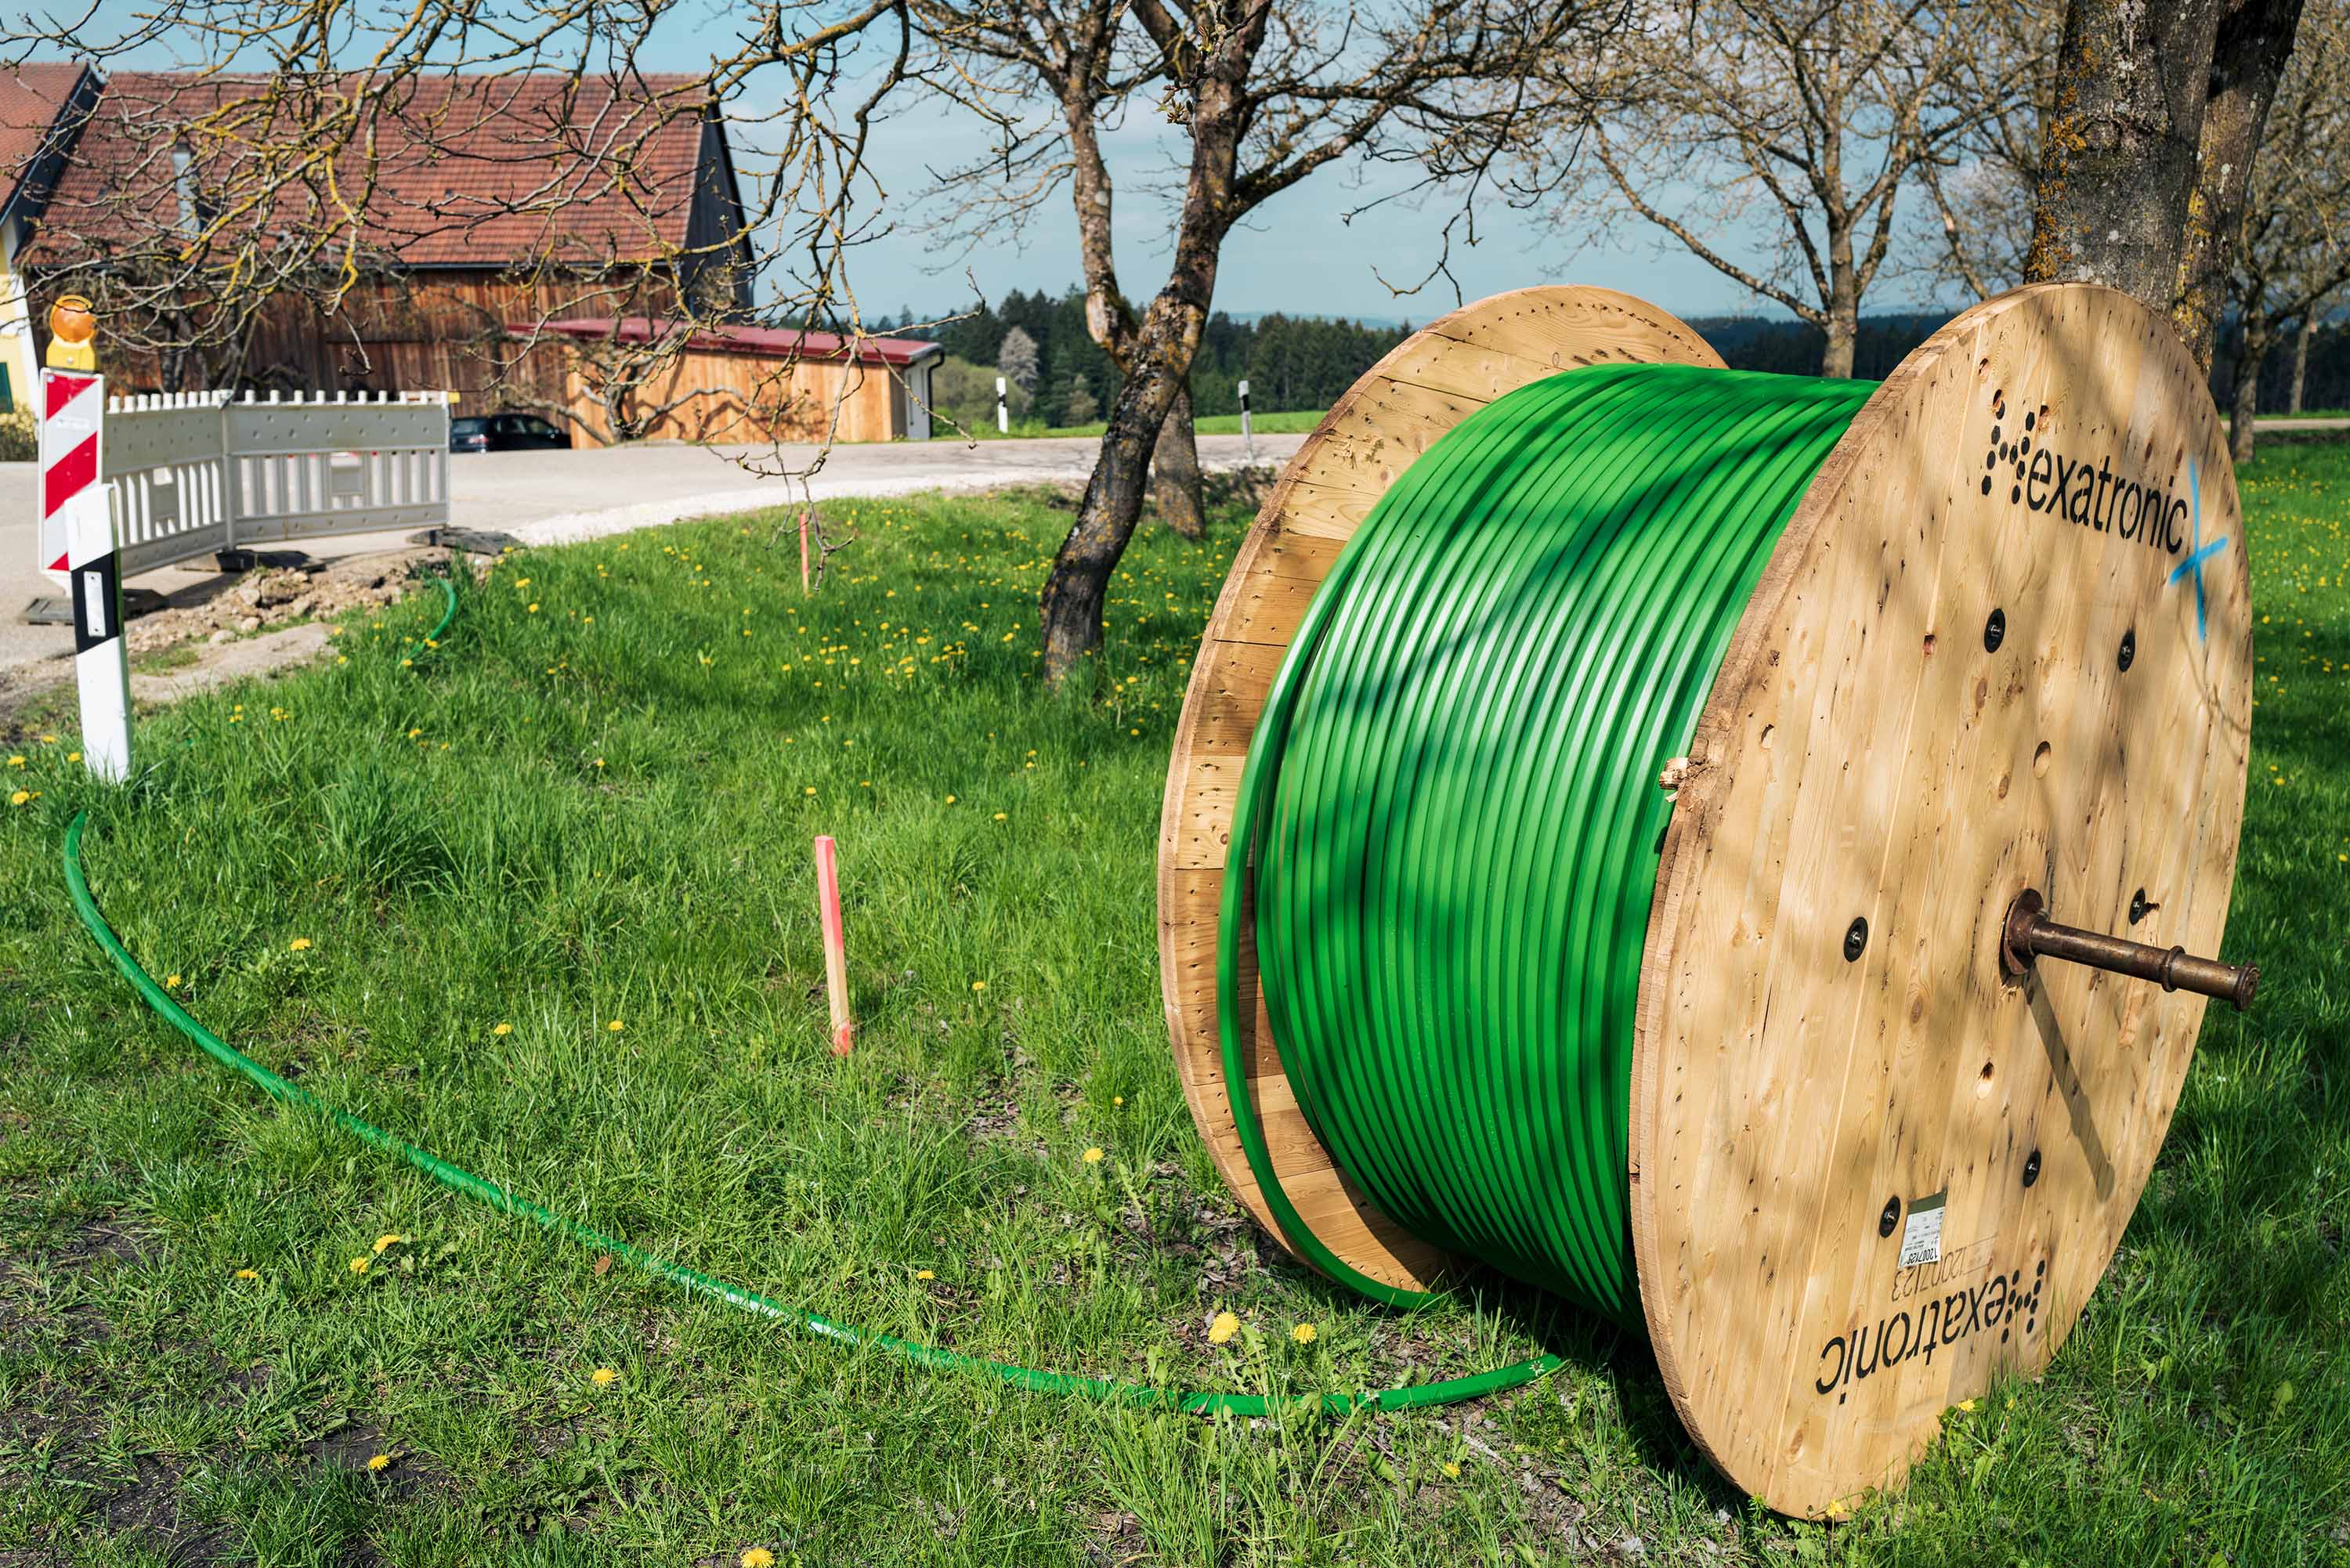 A large wooden spool with green duct is by a grassy roadside, near a house and fence, under a clear sky.